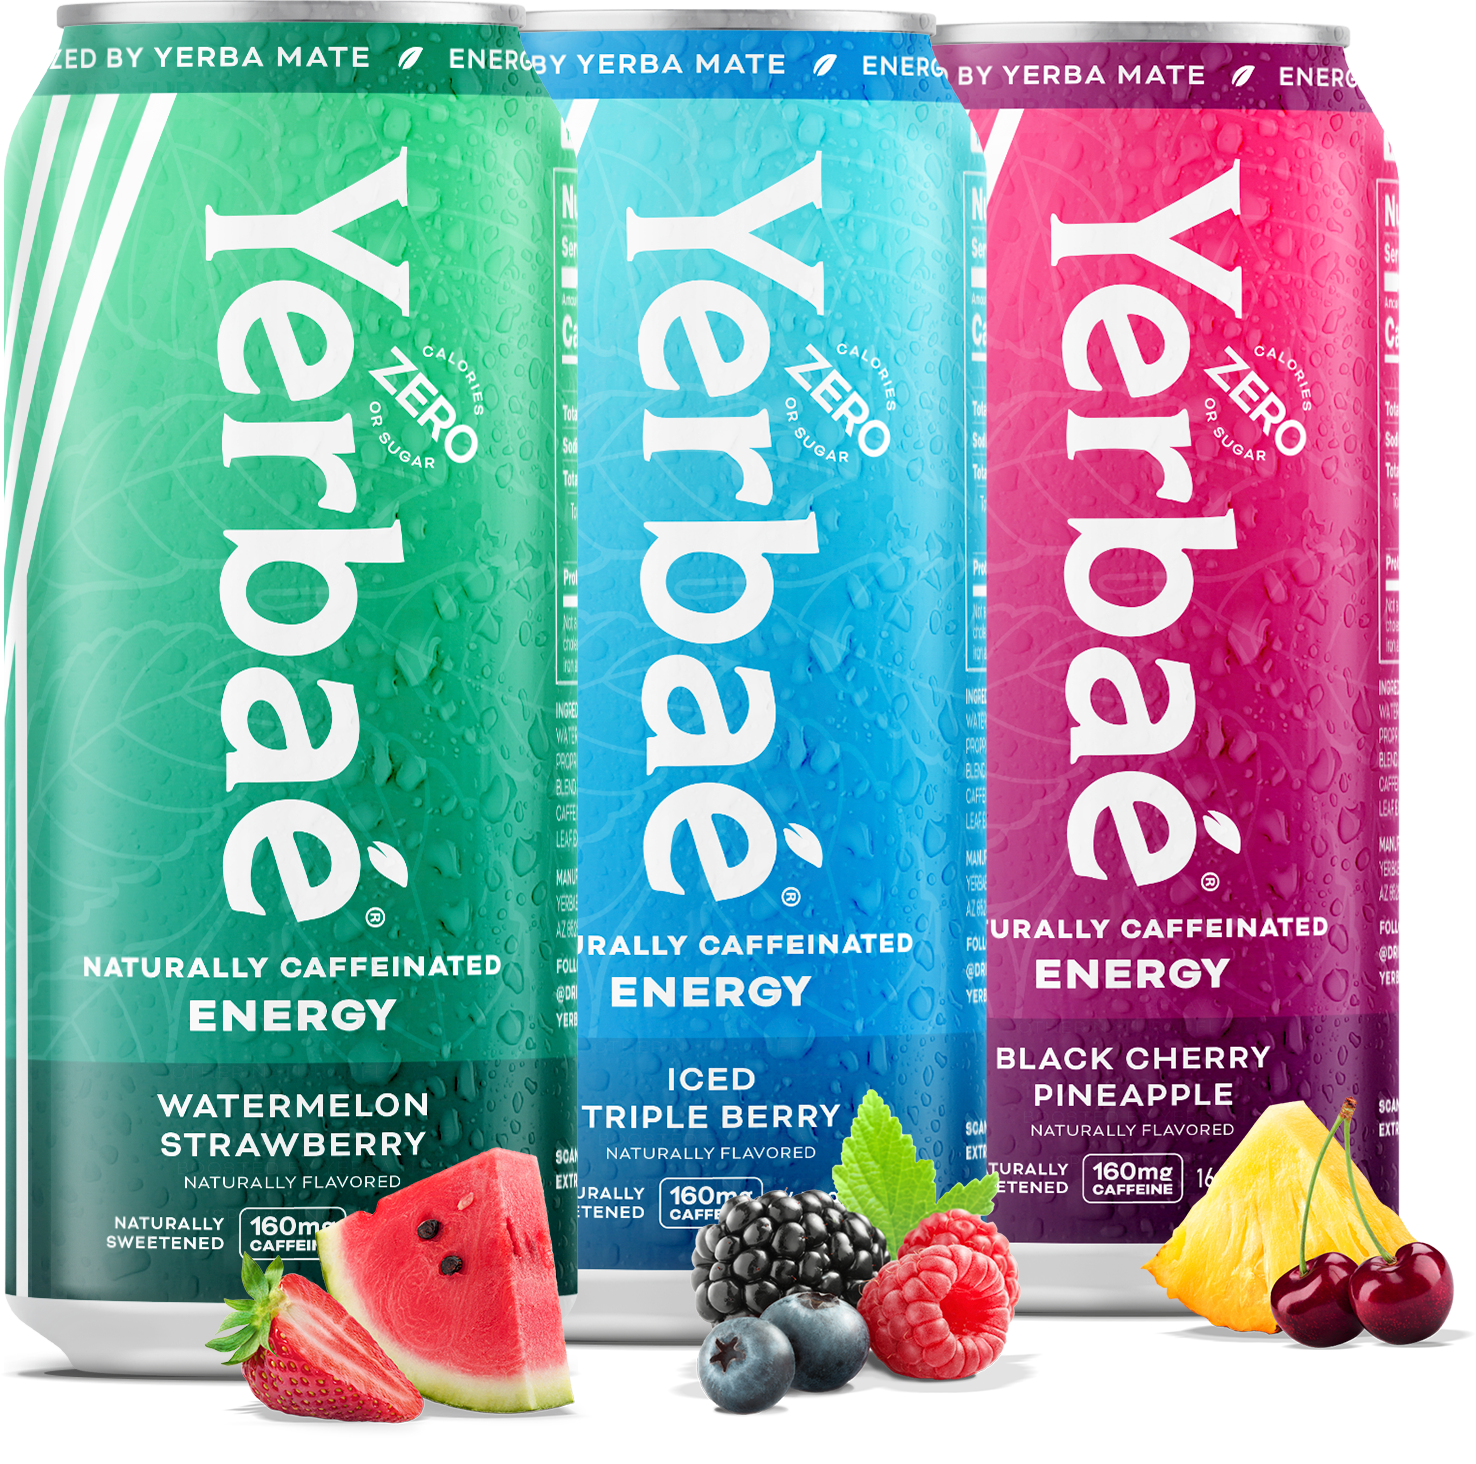 Honest Tea Launches Yerba Mate Products